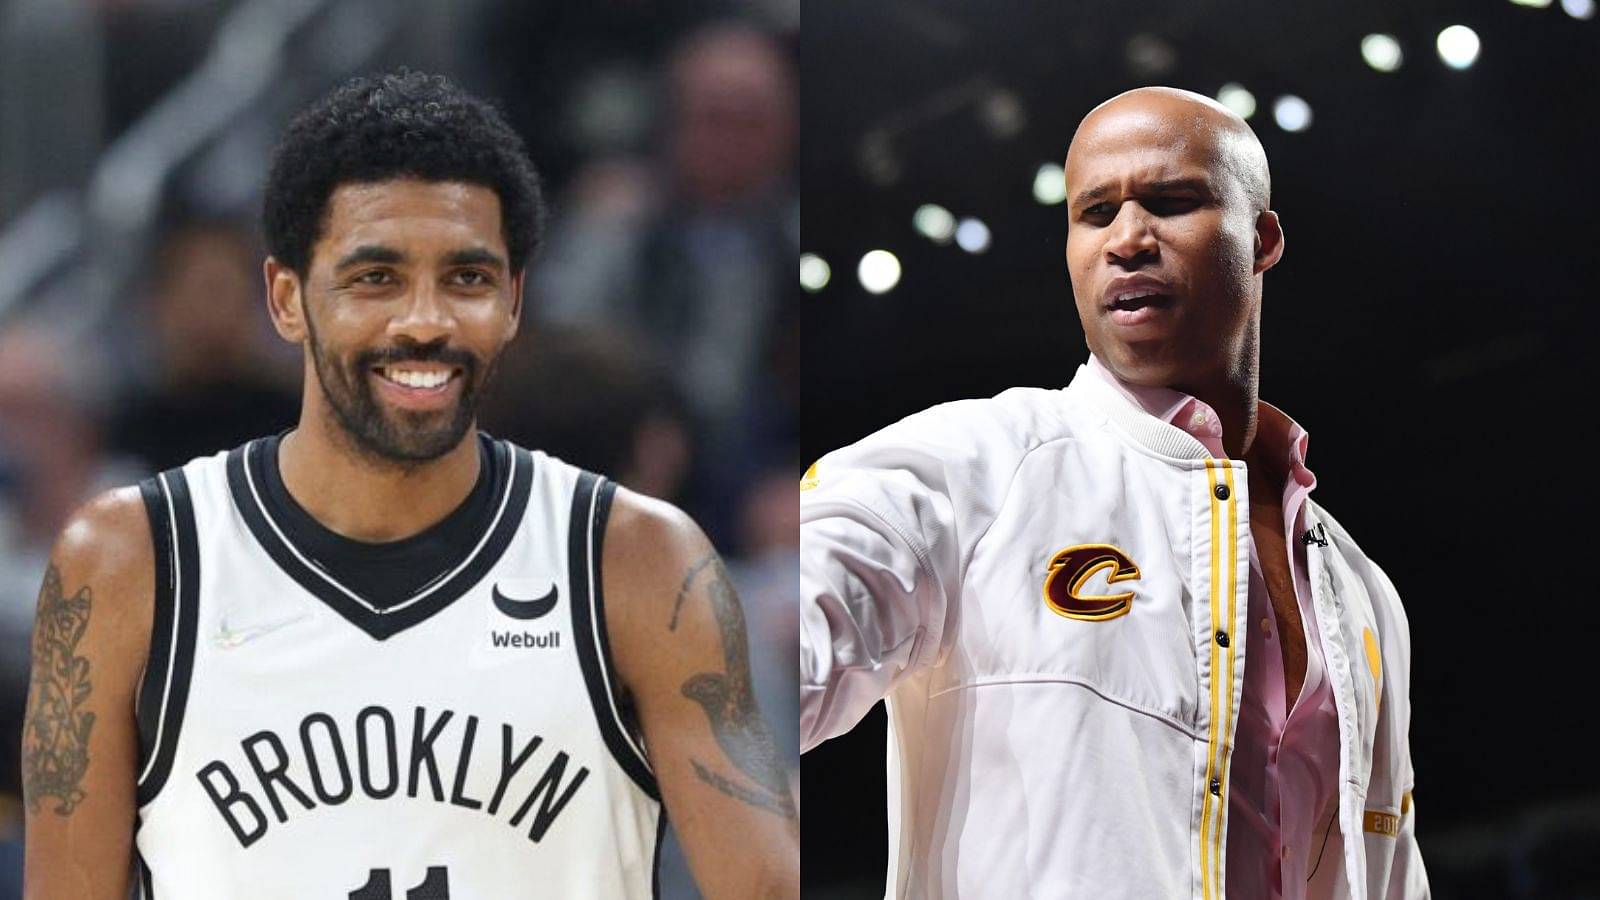 “Kyrie Irving Says He's Not Antisemitic, But His Tweet is Still Up”: Richard Jefferson Calls Out Nets Star While Commentating in the Pacers Game